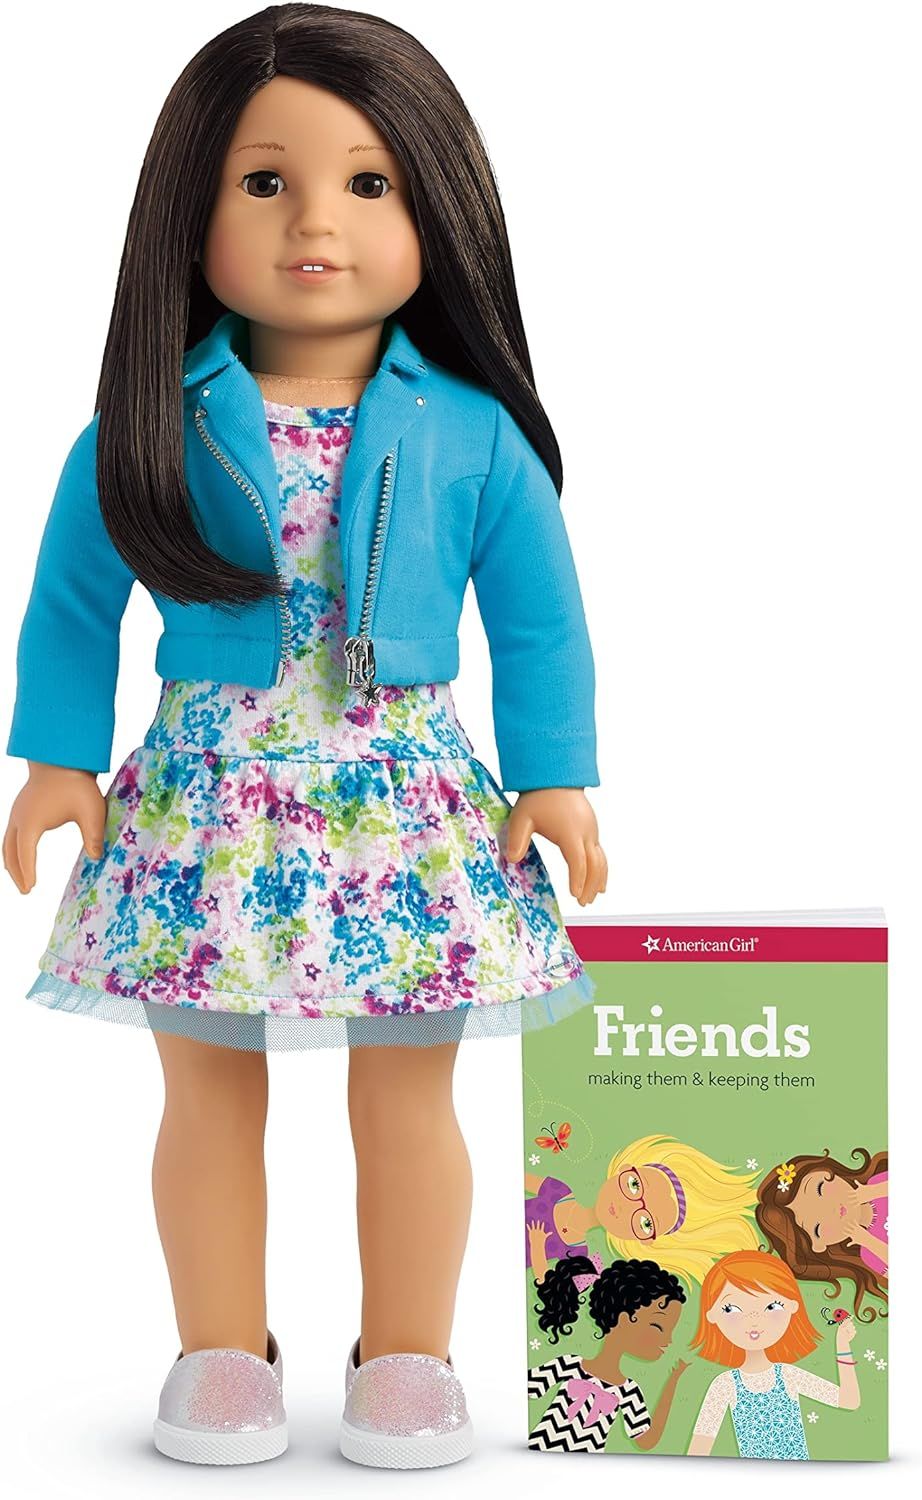 American Girl Truly Me Doll #64 with Brown Eyes, Black Hair, Light Skin Tone | Amazon (US)